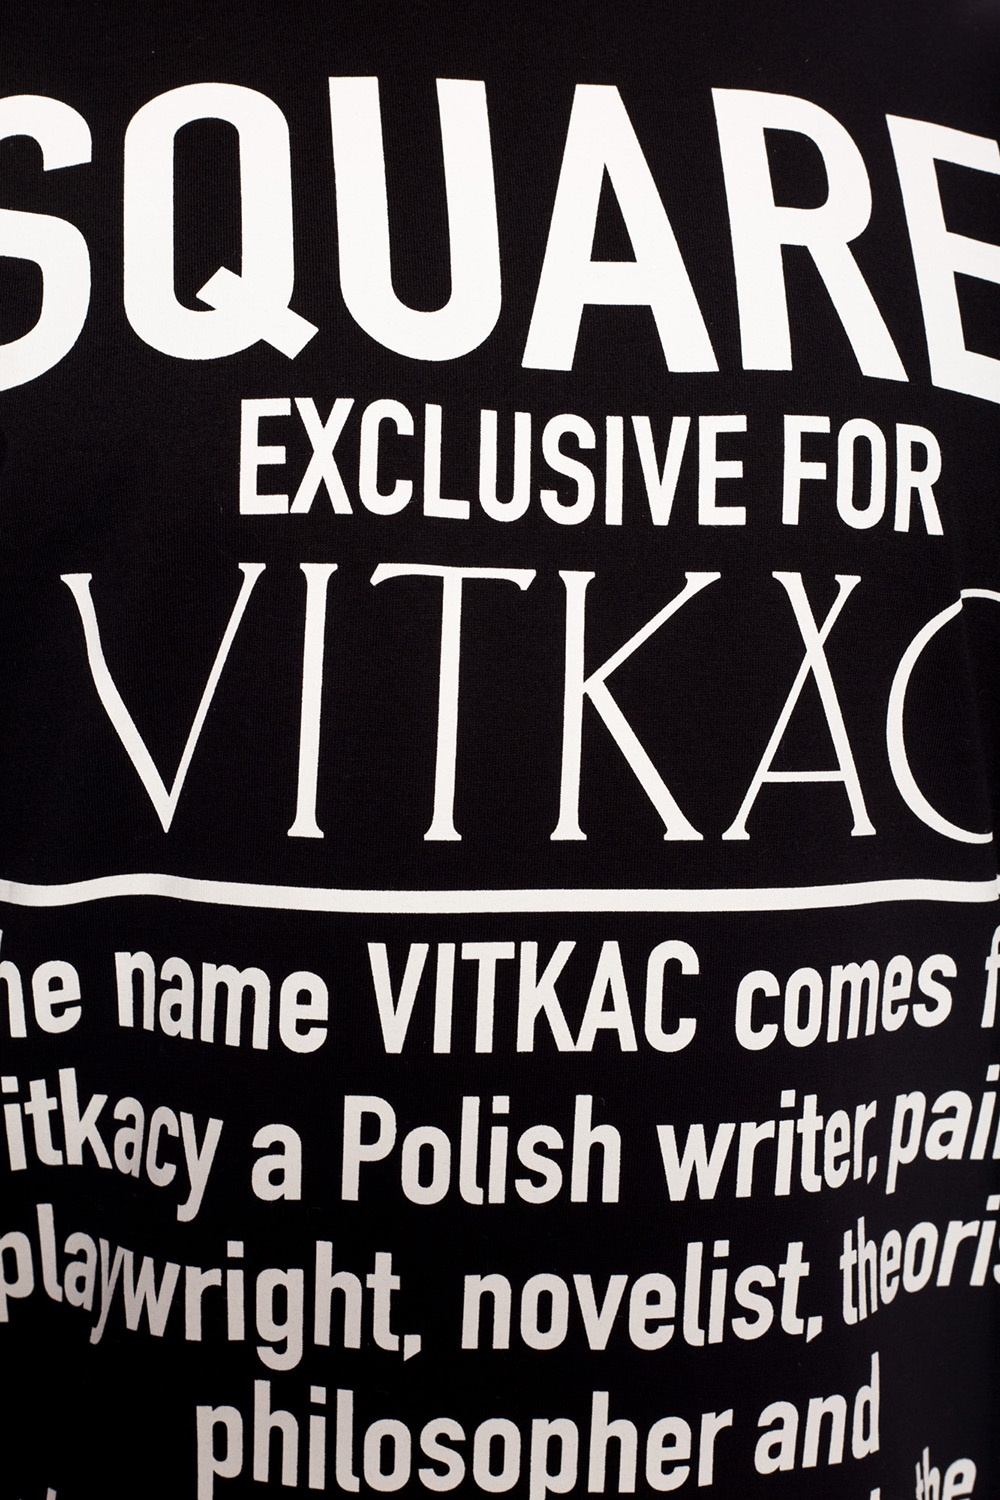 Black 'Exclusive for Vitkac' limited collection t-shirt Dsquared2 - Vitkac  Italy